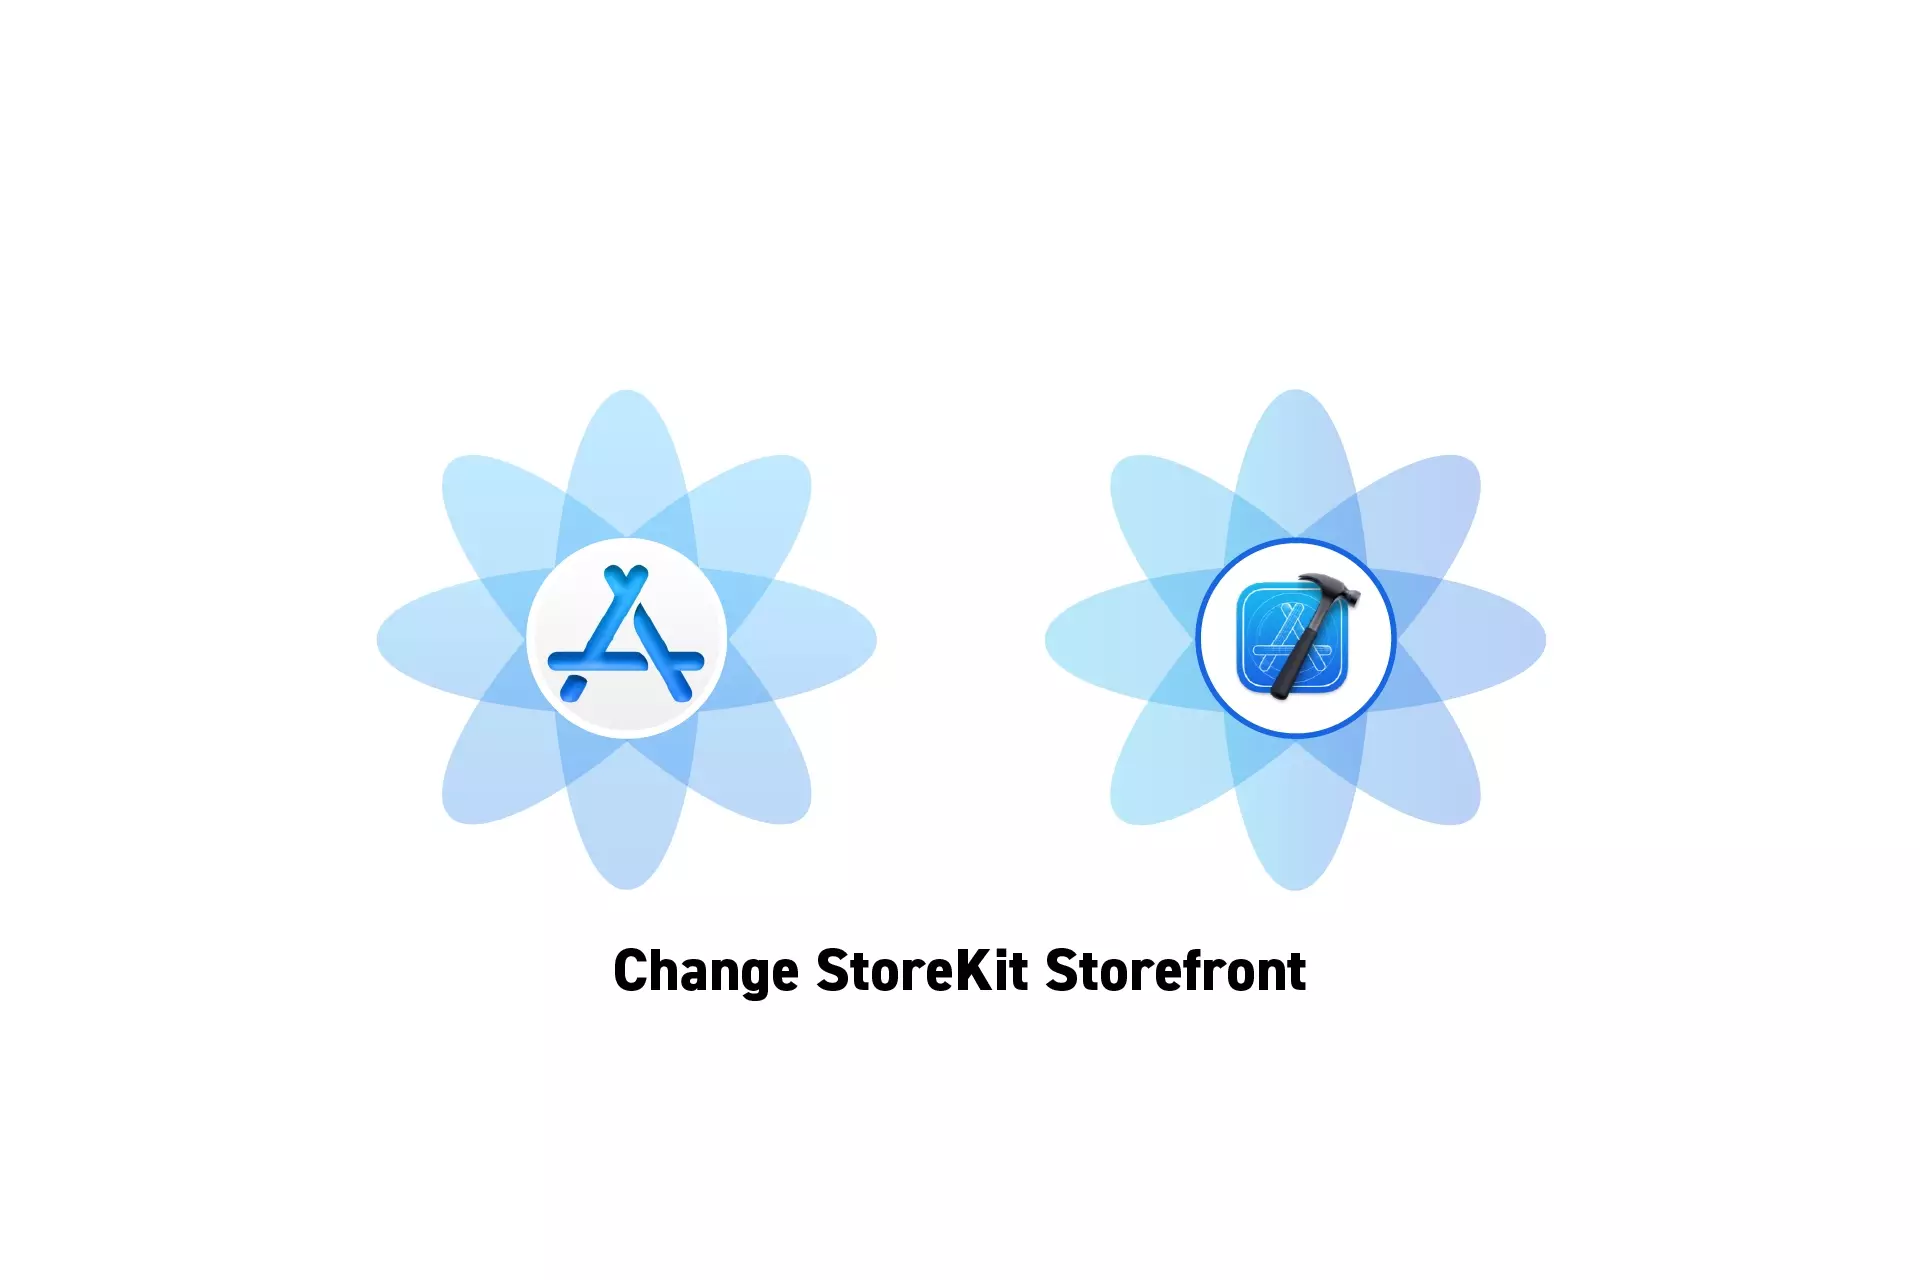 Two flowers that represent StoreKit and Xcode, beneath them sits the text "Change StoreKit Storefront."